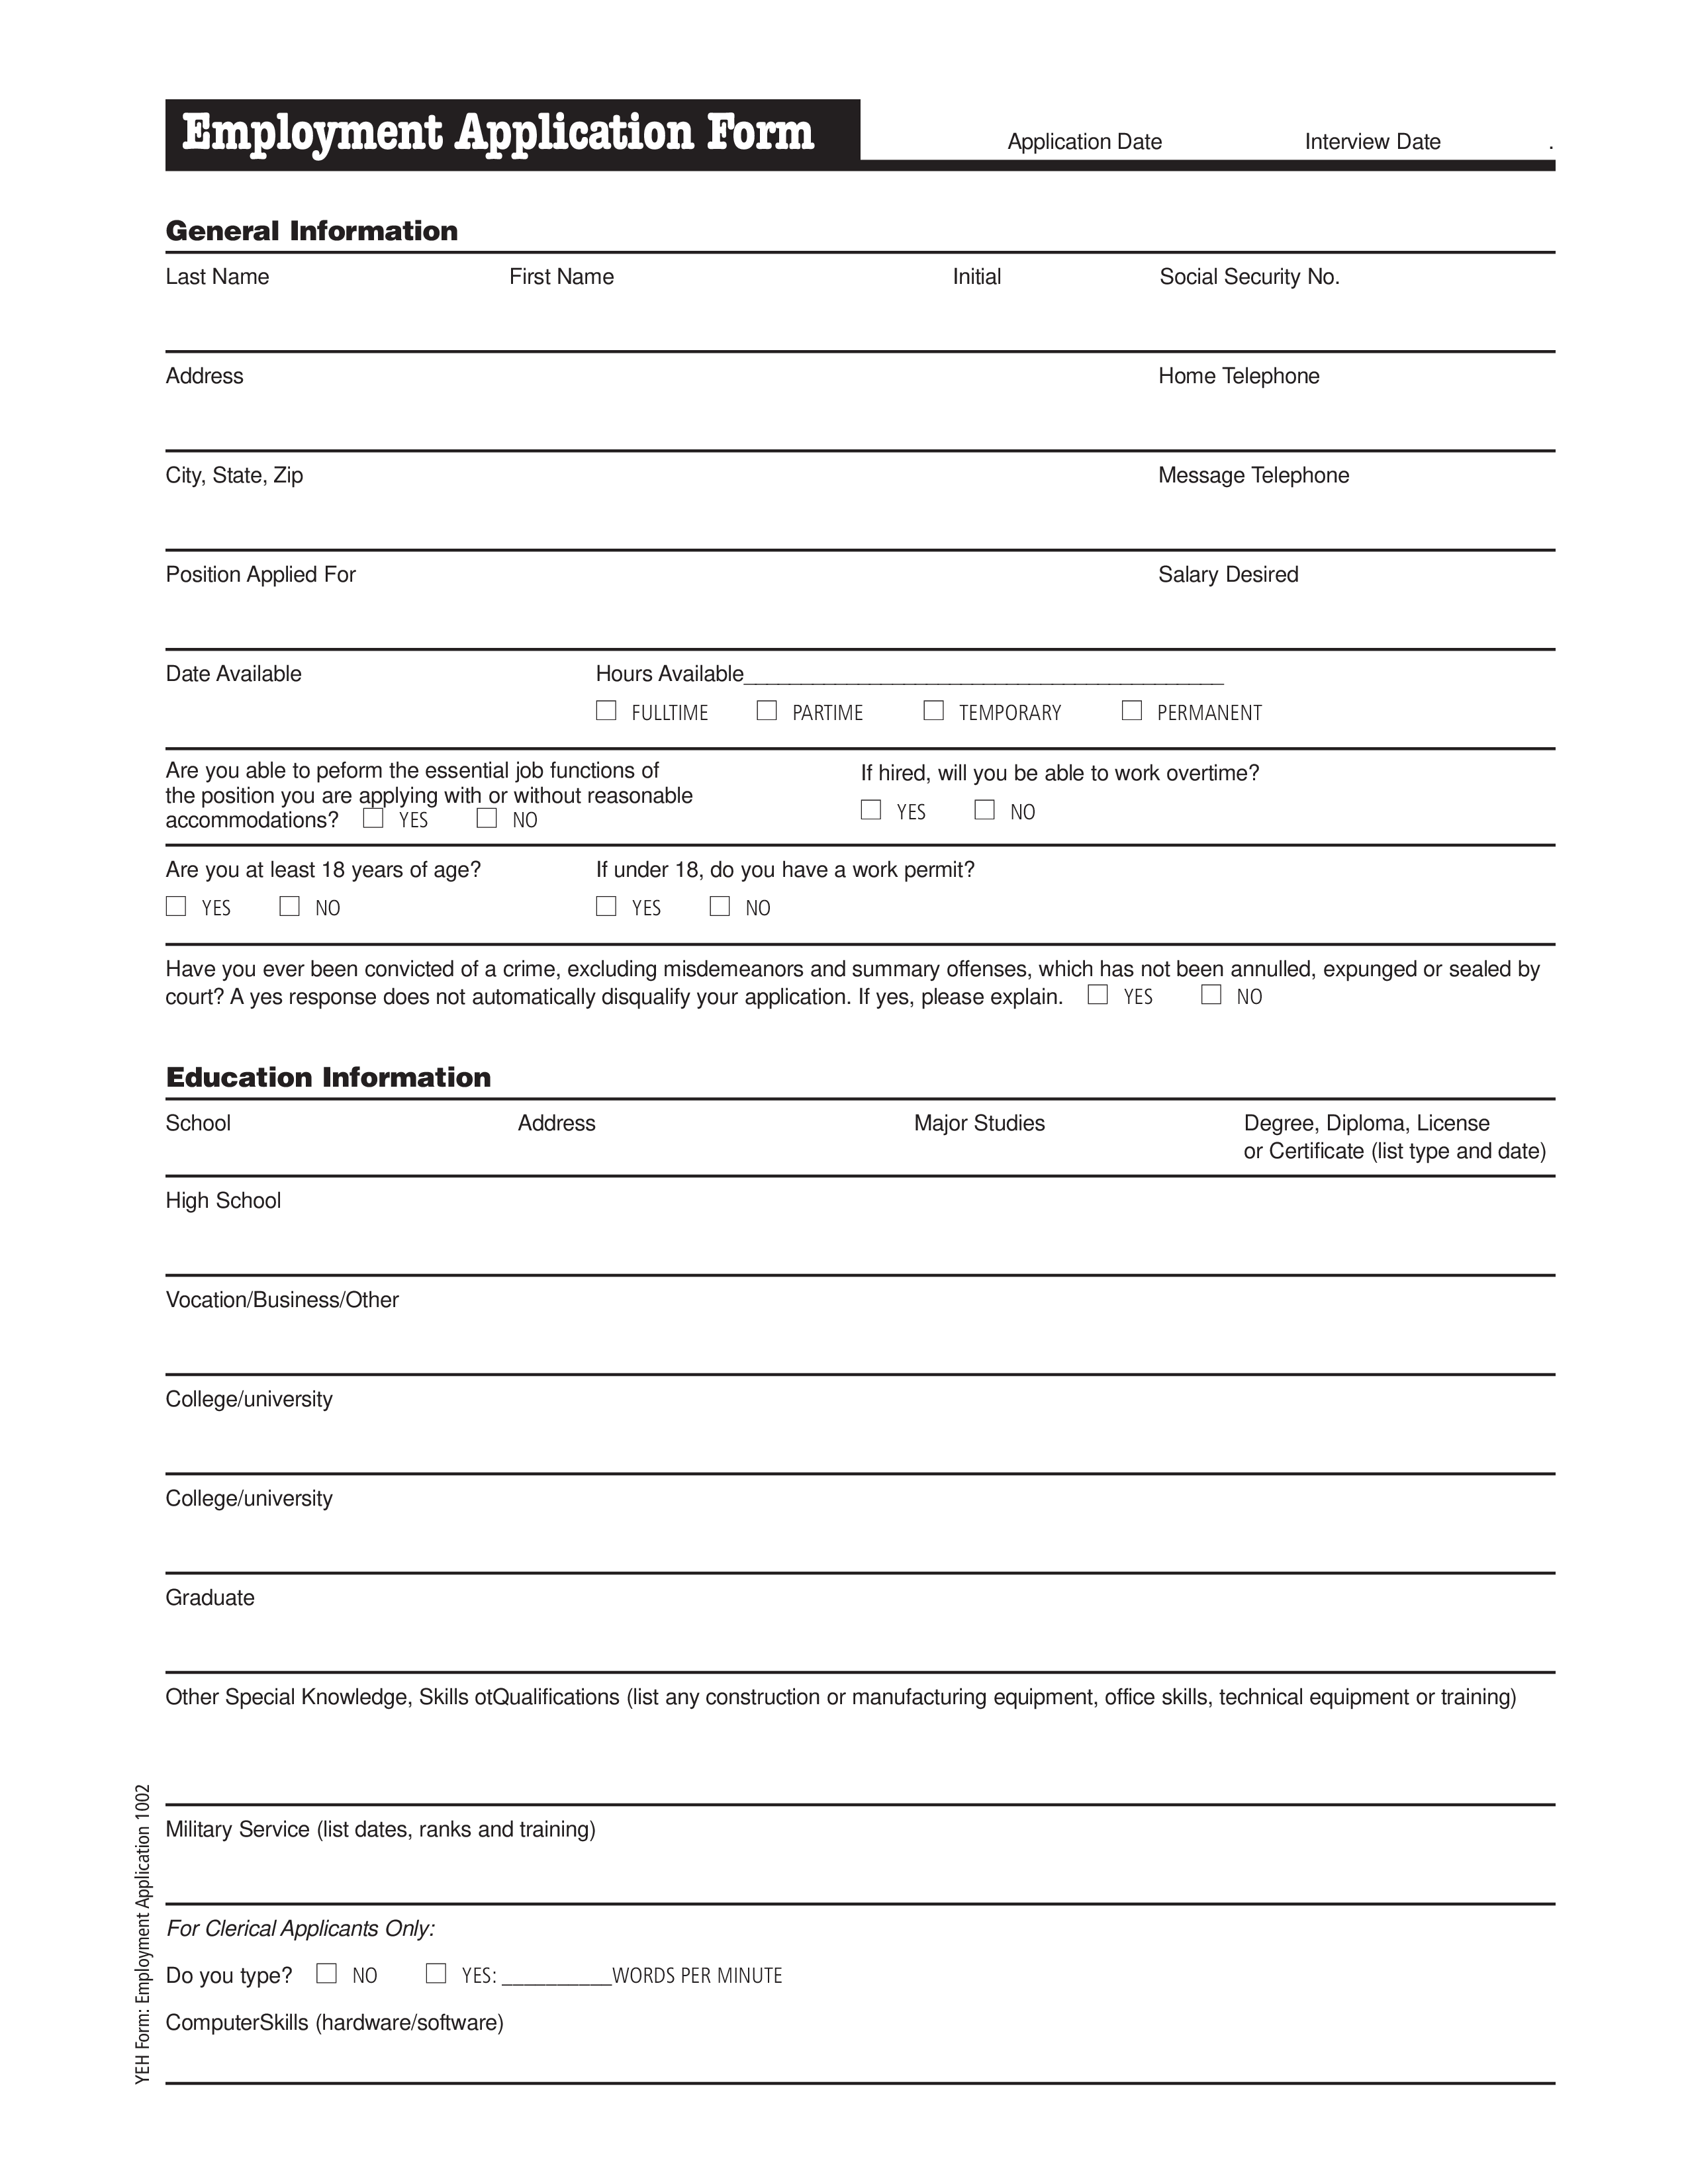 Generic Employment Application Form template 模板